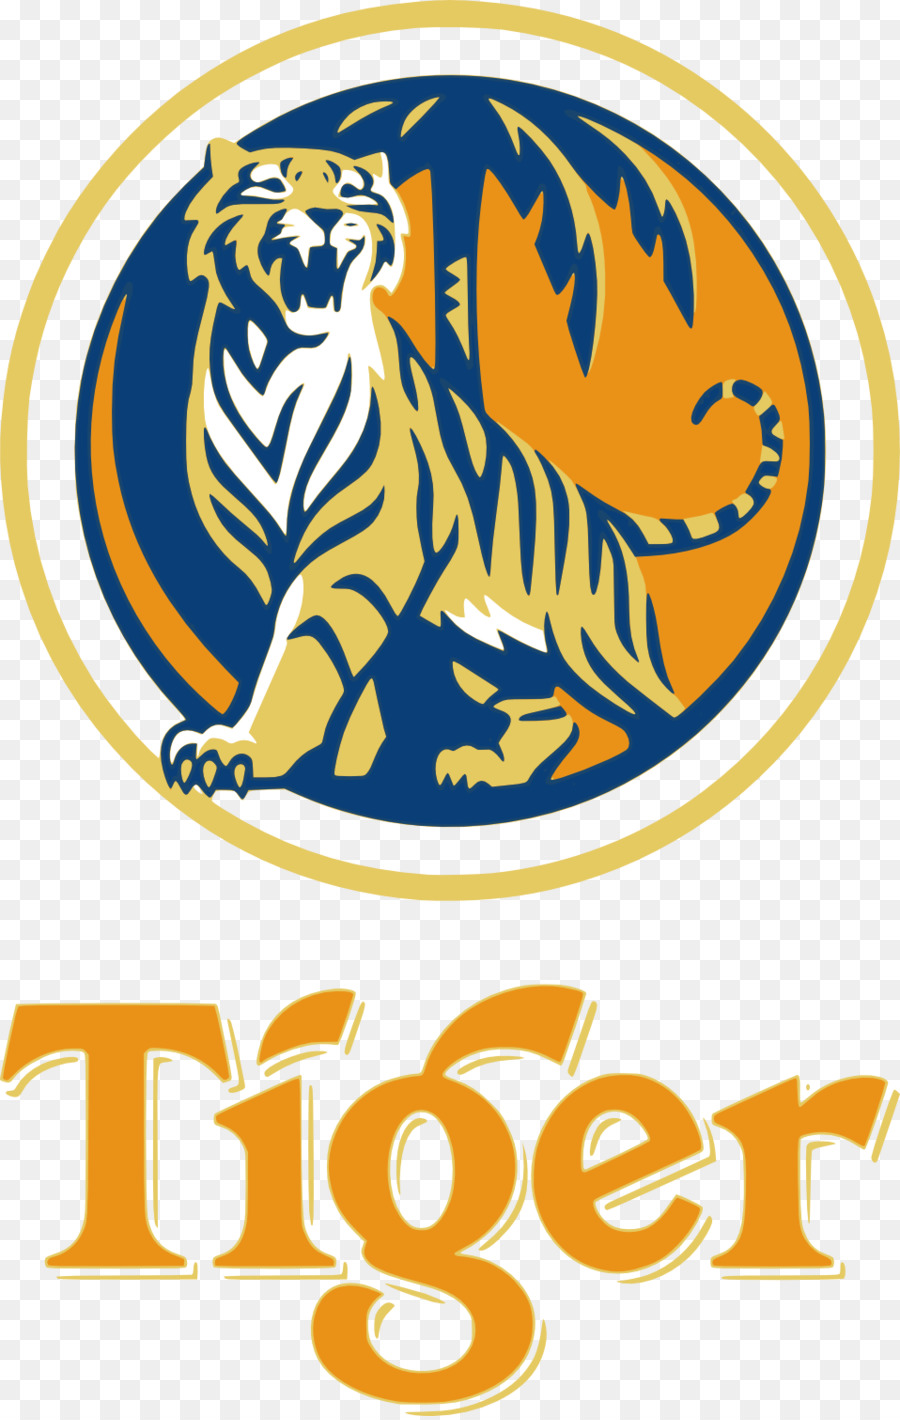 Tiger head logo, png | PNGWing